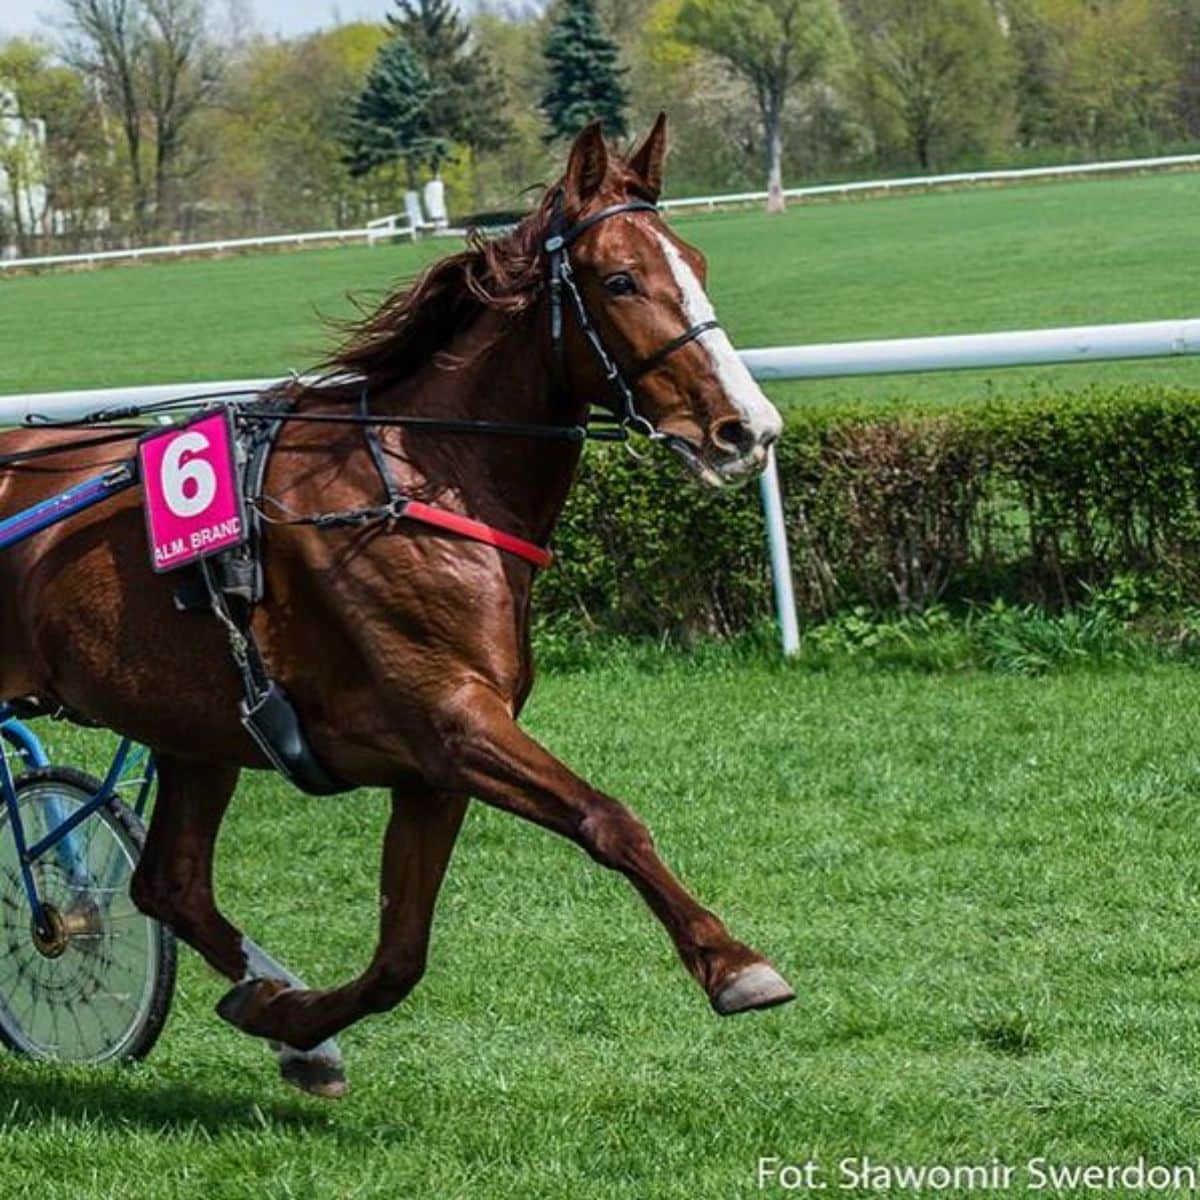 A brown French Trotter horse pulls a wagon.